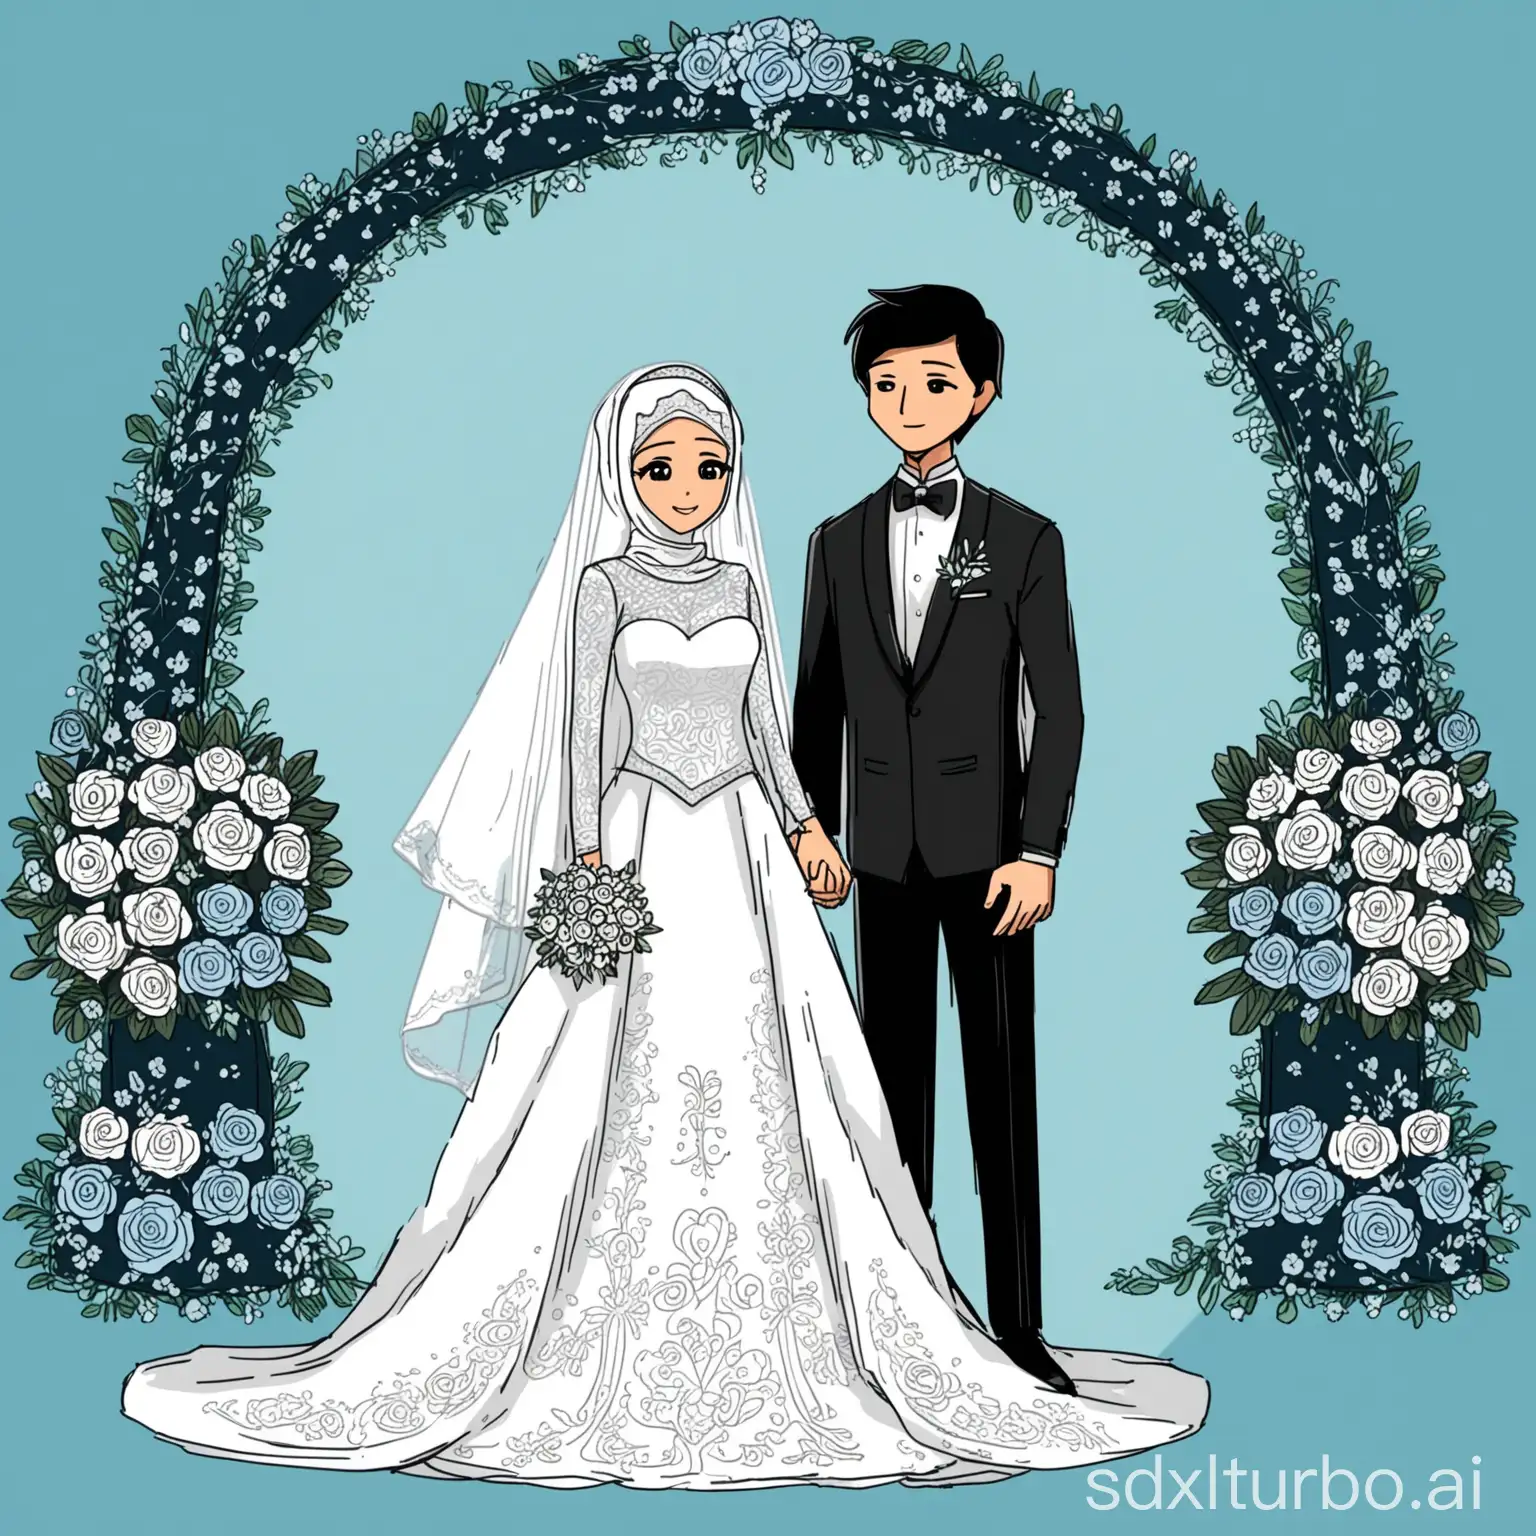 Elegant-Wedding-Ceremony-Illustration-Bride-in-White-Lace-Gown-and-Hijab-Groom-in-Classic-Tuxedo